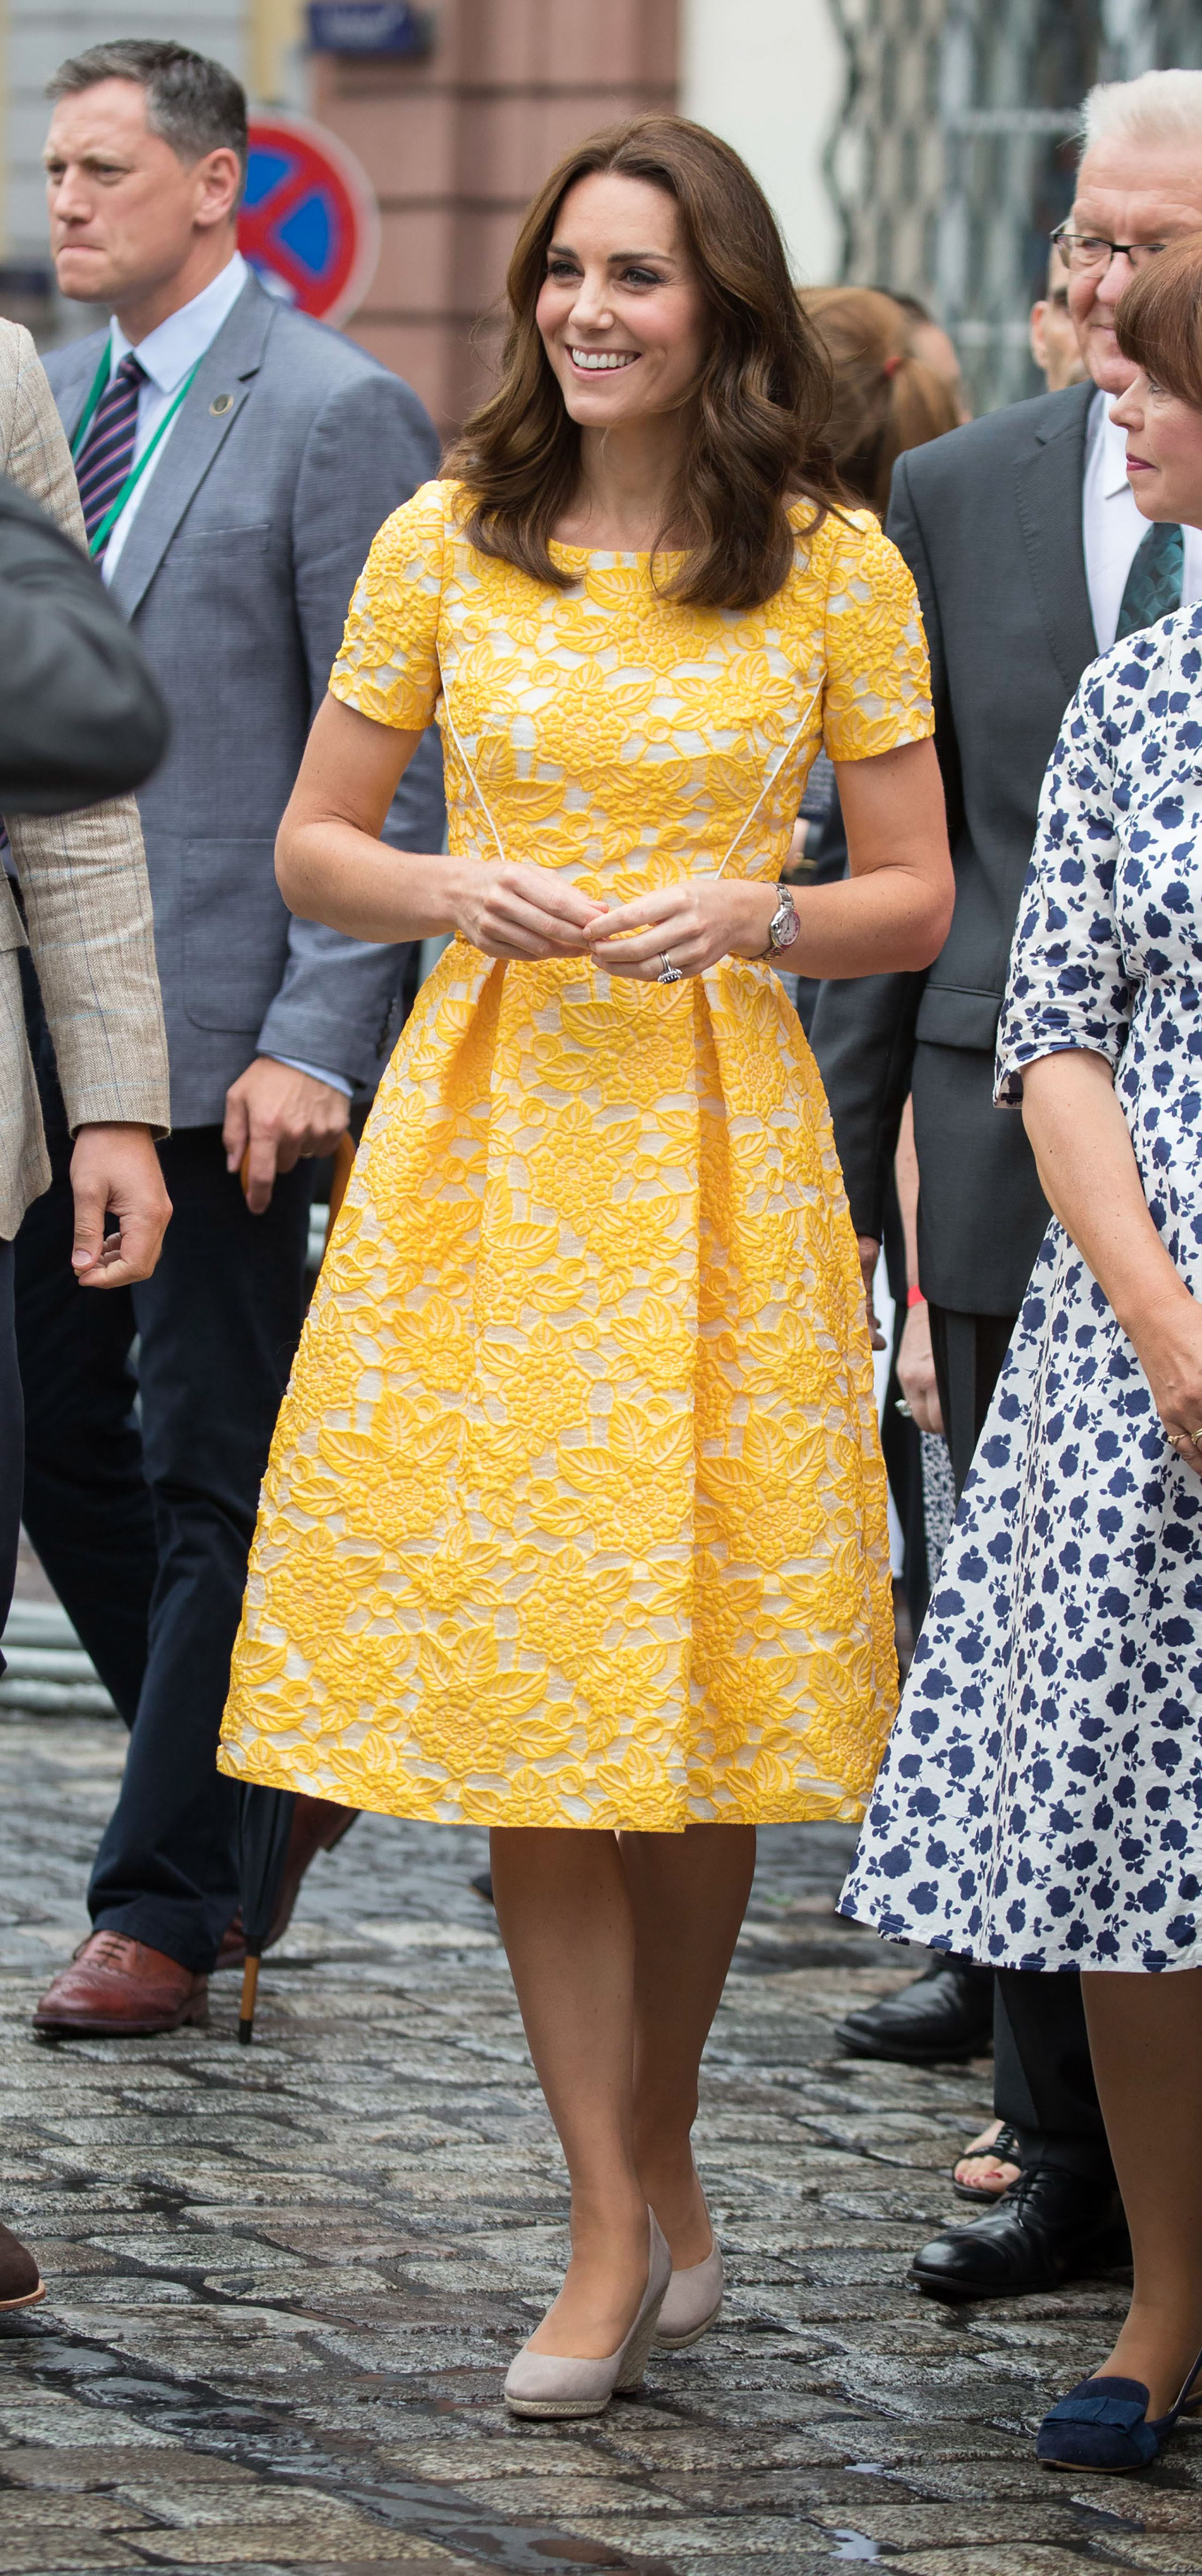 HEIDELBERG, GERMANY - JULY 20:  (NO UK SALES FOR 28 DAYS FROM CREATE DATE) Catherine, Duchess of Cambridge tours  a traditional German market in the Central Square during an official visit to Poland and Germany on July 20, 2017 in Heidelberg, Germany.  (Photo by Pool/Samir Hussein/WireImage)